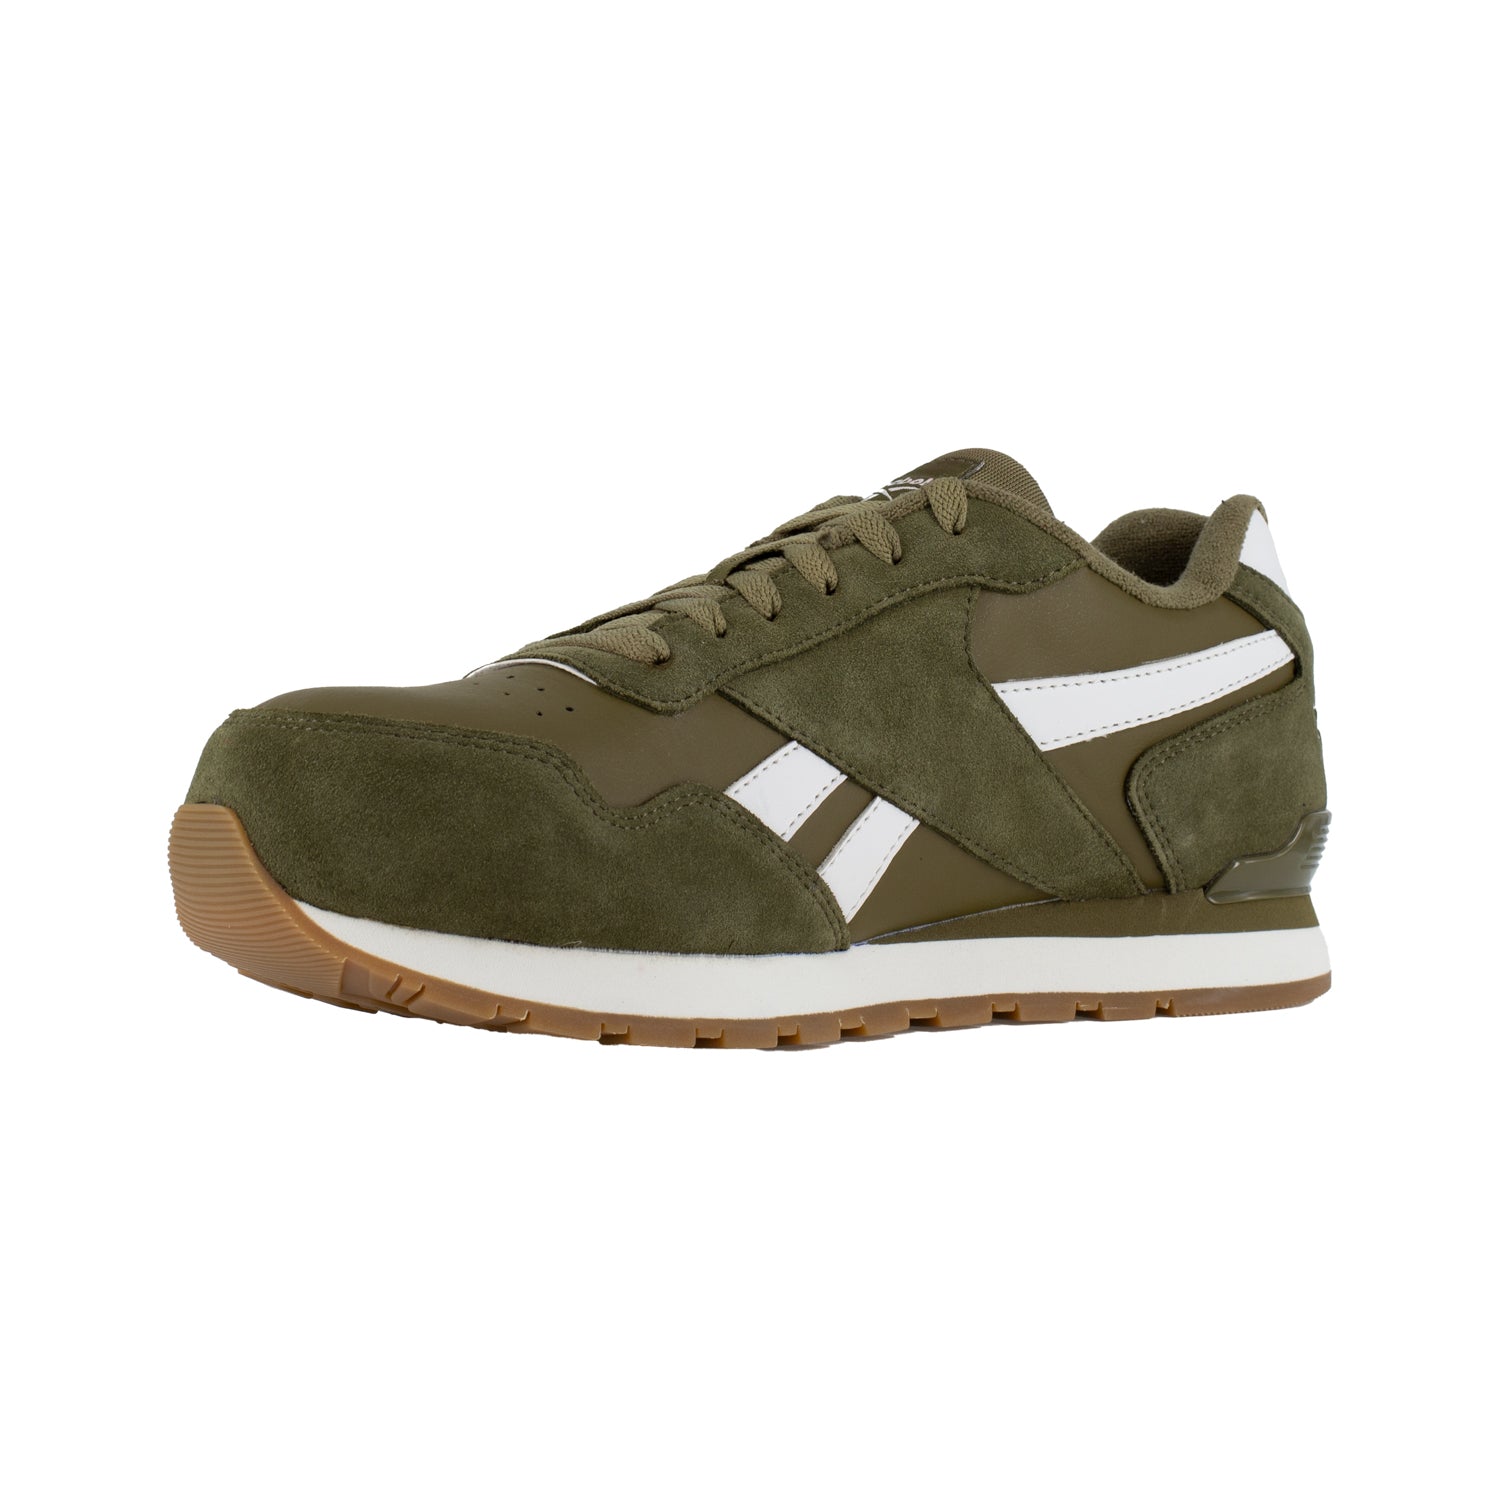 Reebok Mens Olive Work Shoes Classic Sneaker CT – The Western Company